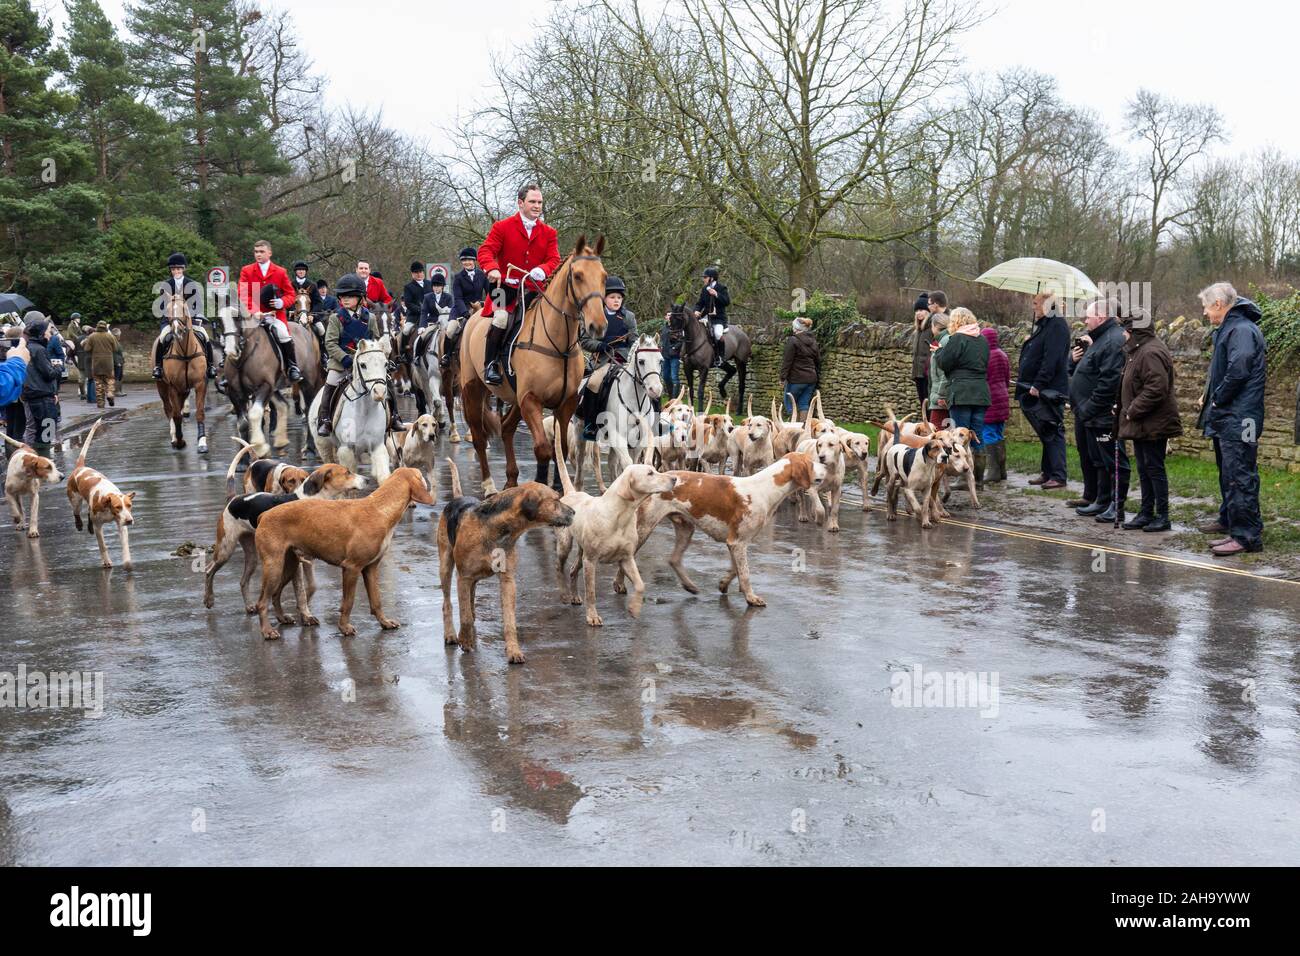 The traditional Avon Vale hunt held annually on Boxing Day from Lacock, Wiltshire, England, UK Stock Photo